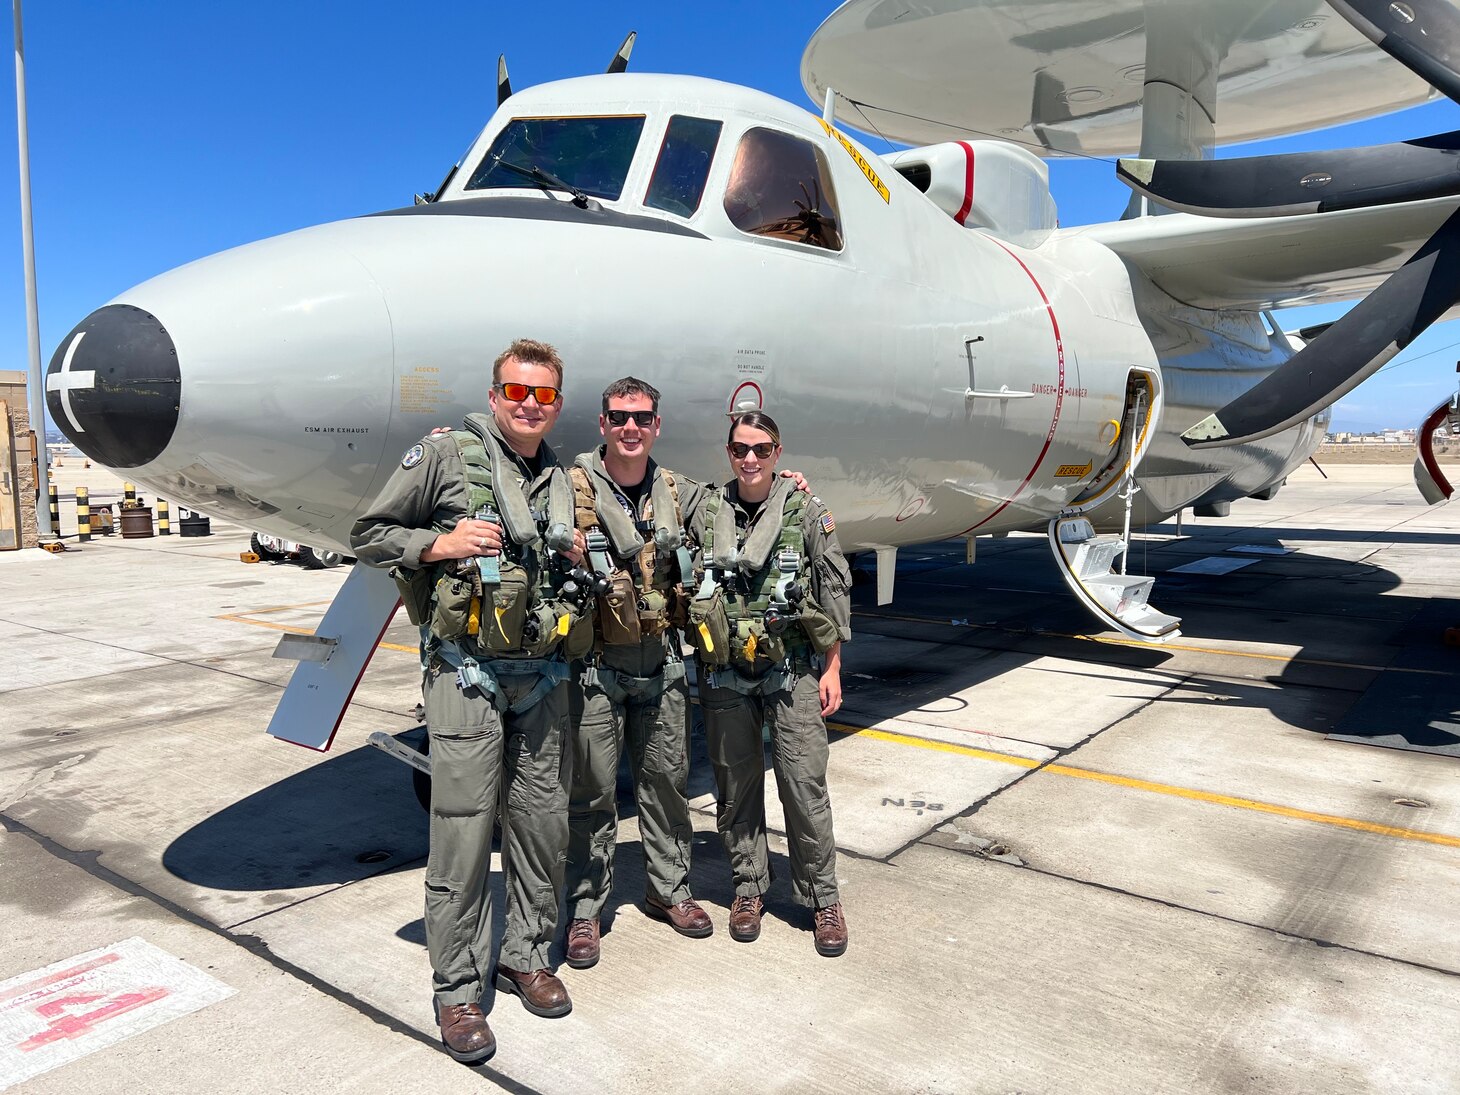 At far right, Lt. Erica Sciscoe, a Naval Flight Officer and safety program manager with Fleet Readiness Center Southwest, poses wtih Cmdr. David Geleszynski, left, and Cmdr. Matt Ostrem.